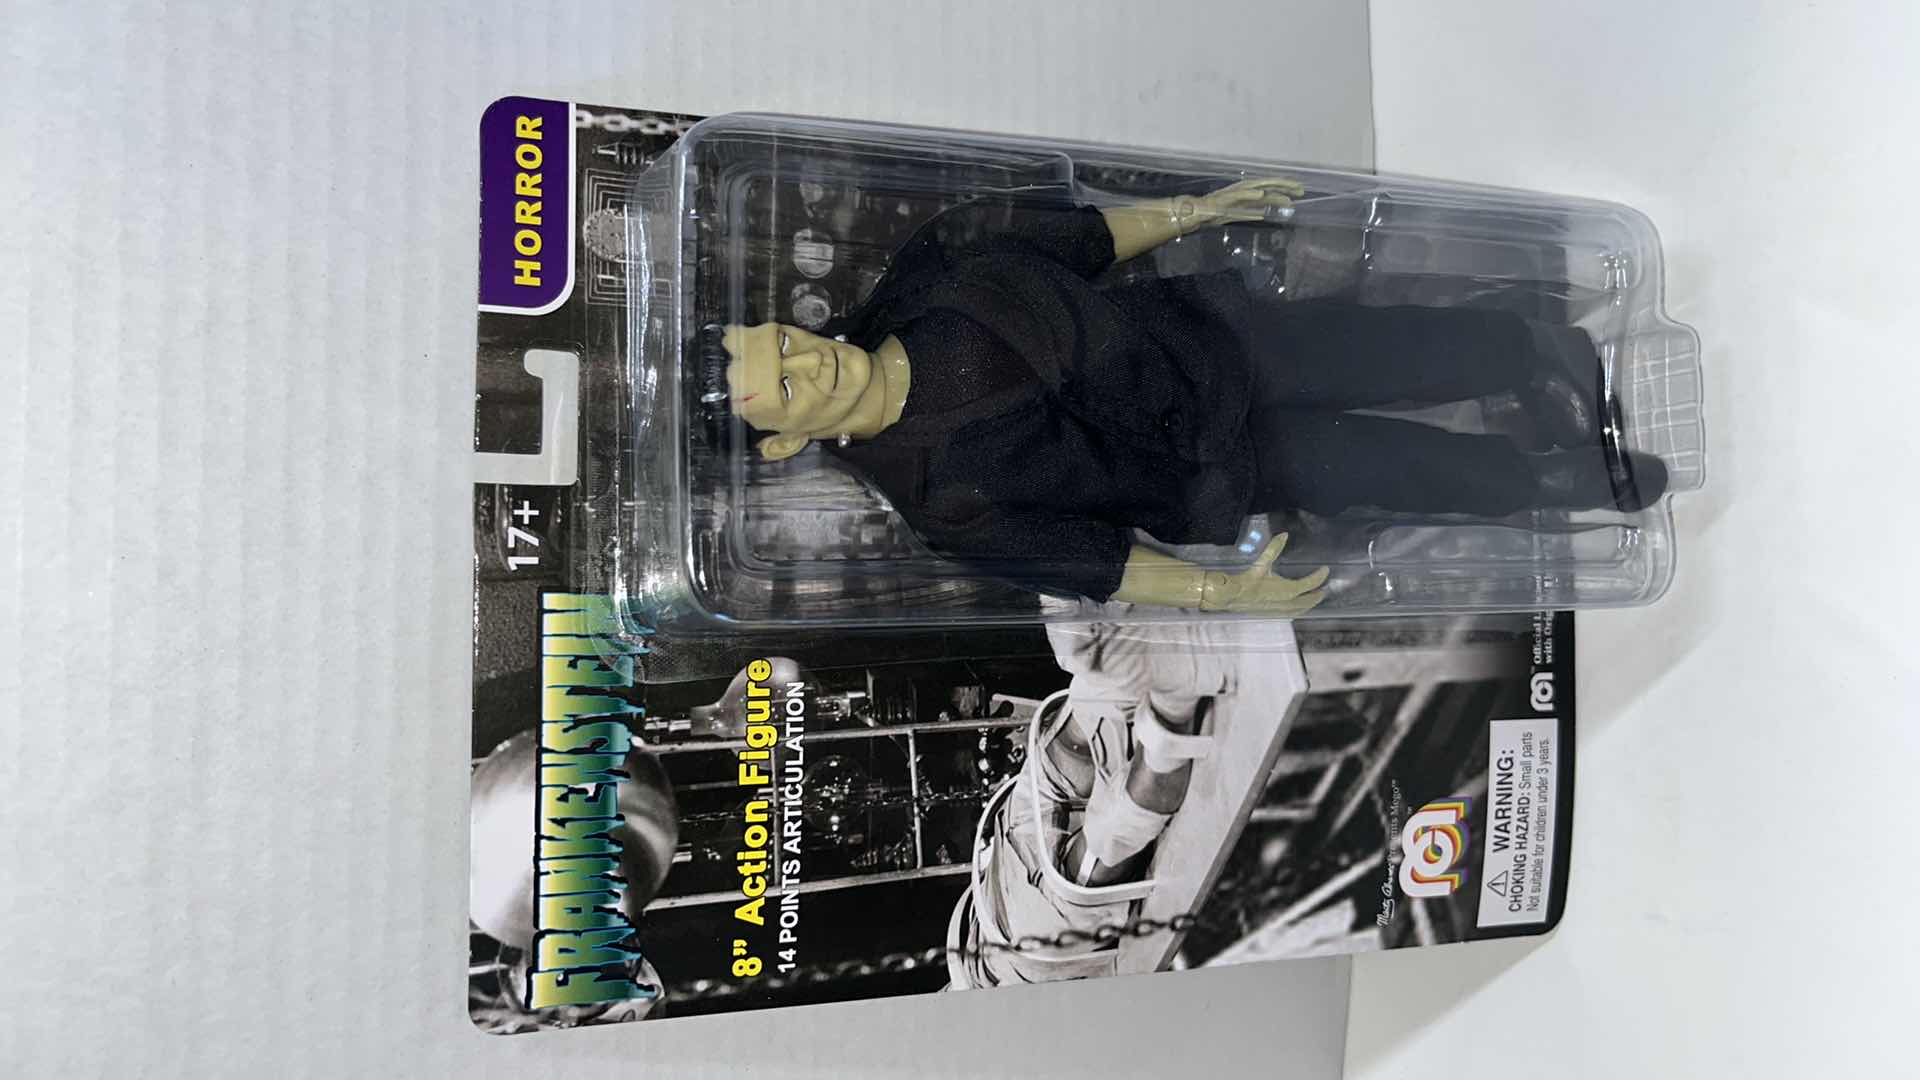 Photo 2 of NIB WORLDS GREATEST MEGO MONSTERS 8” ACTION FIGURE, FRANKENSTEIN & CREATURE FROM THE BLACK LAGOON (2)